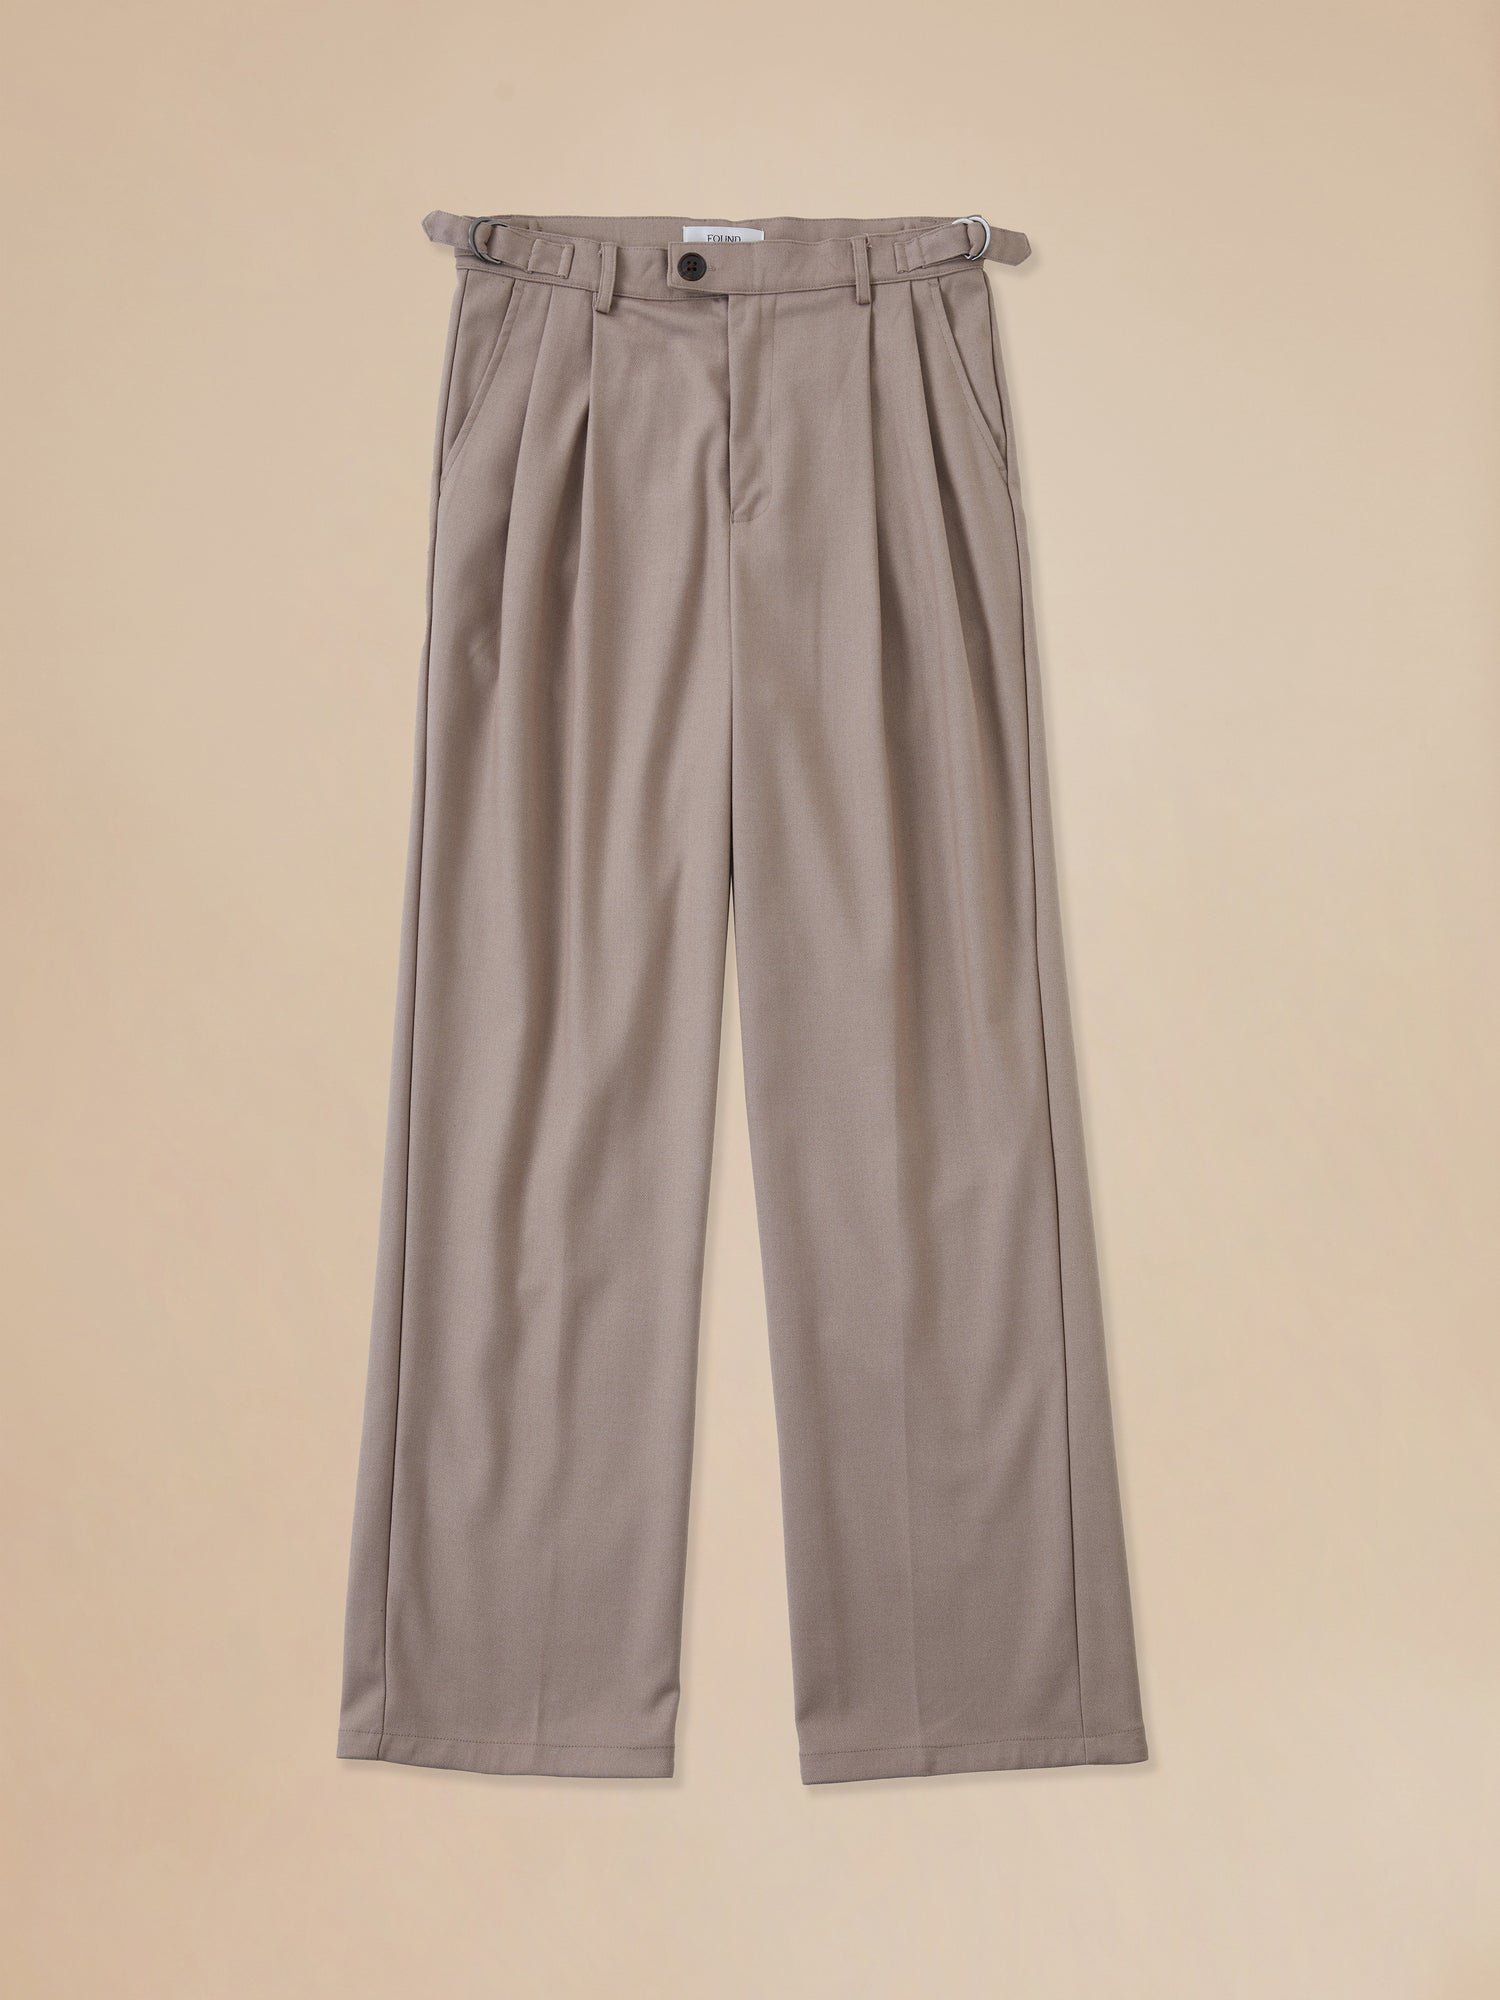 A pair of Pleated Trousers in beige by Found.